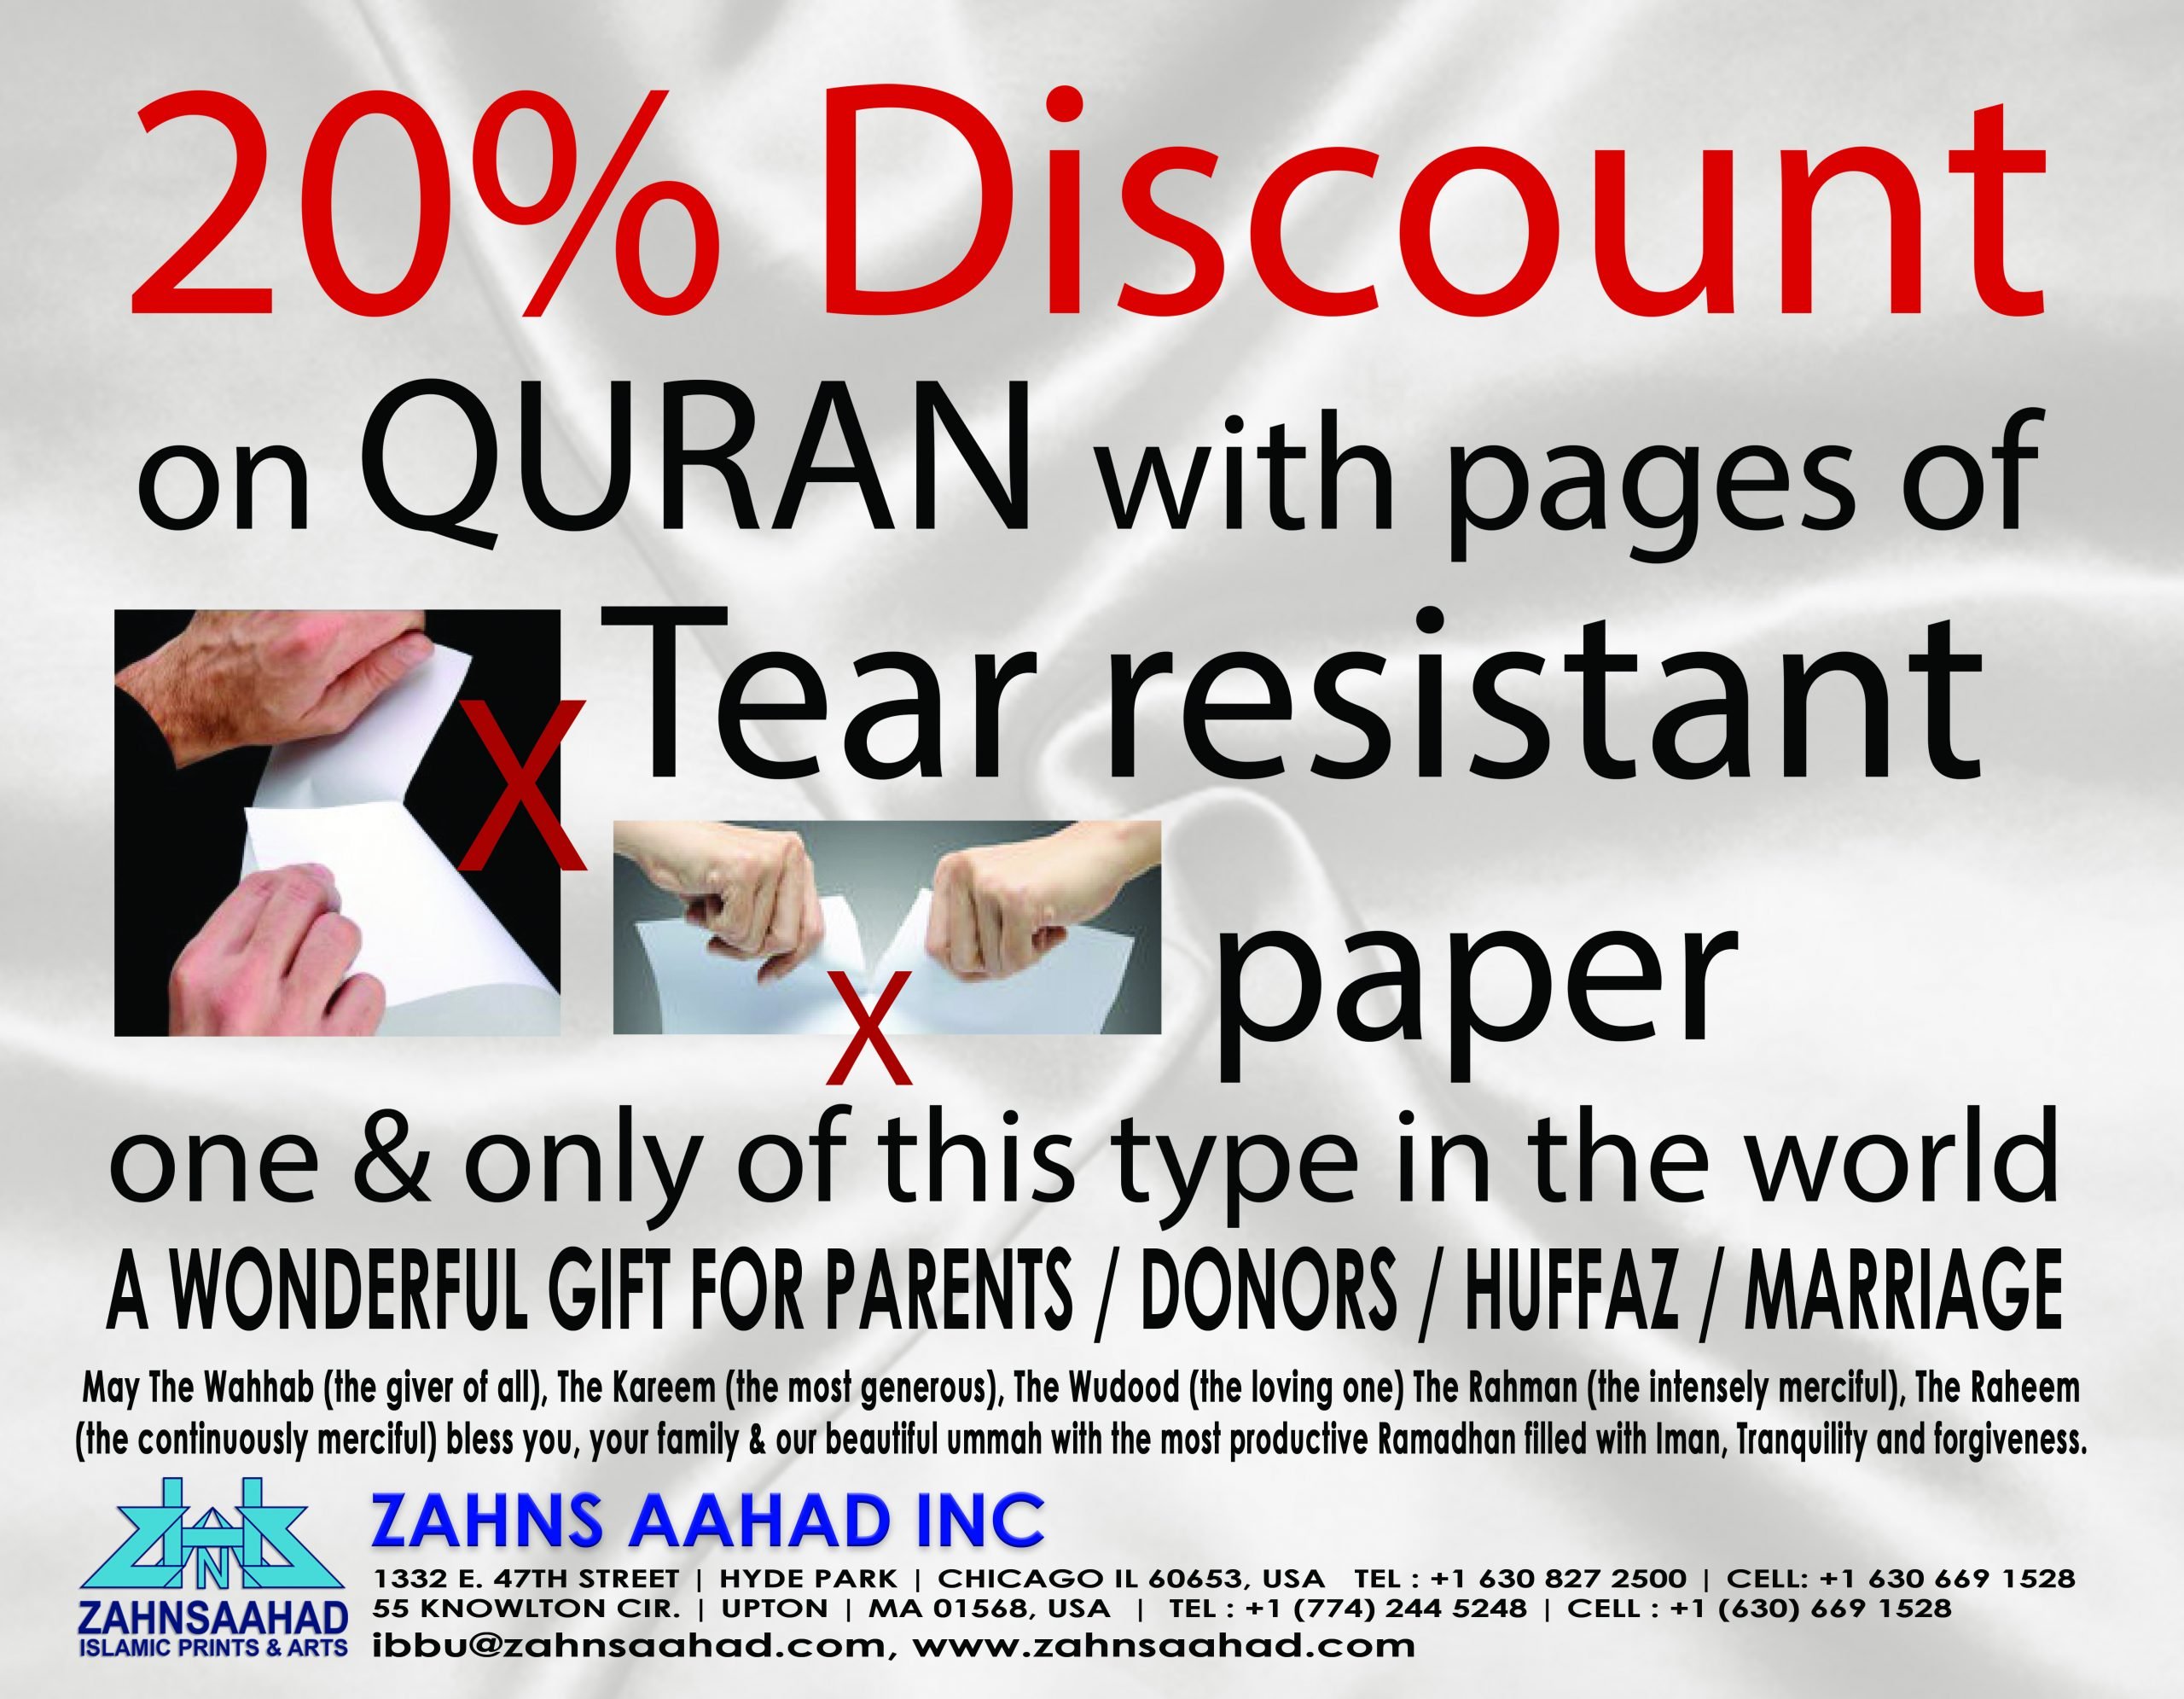 Discount on Quran Tear resistant paper